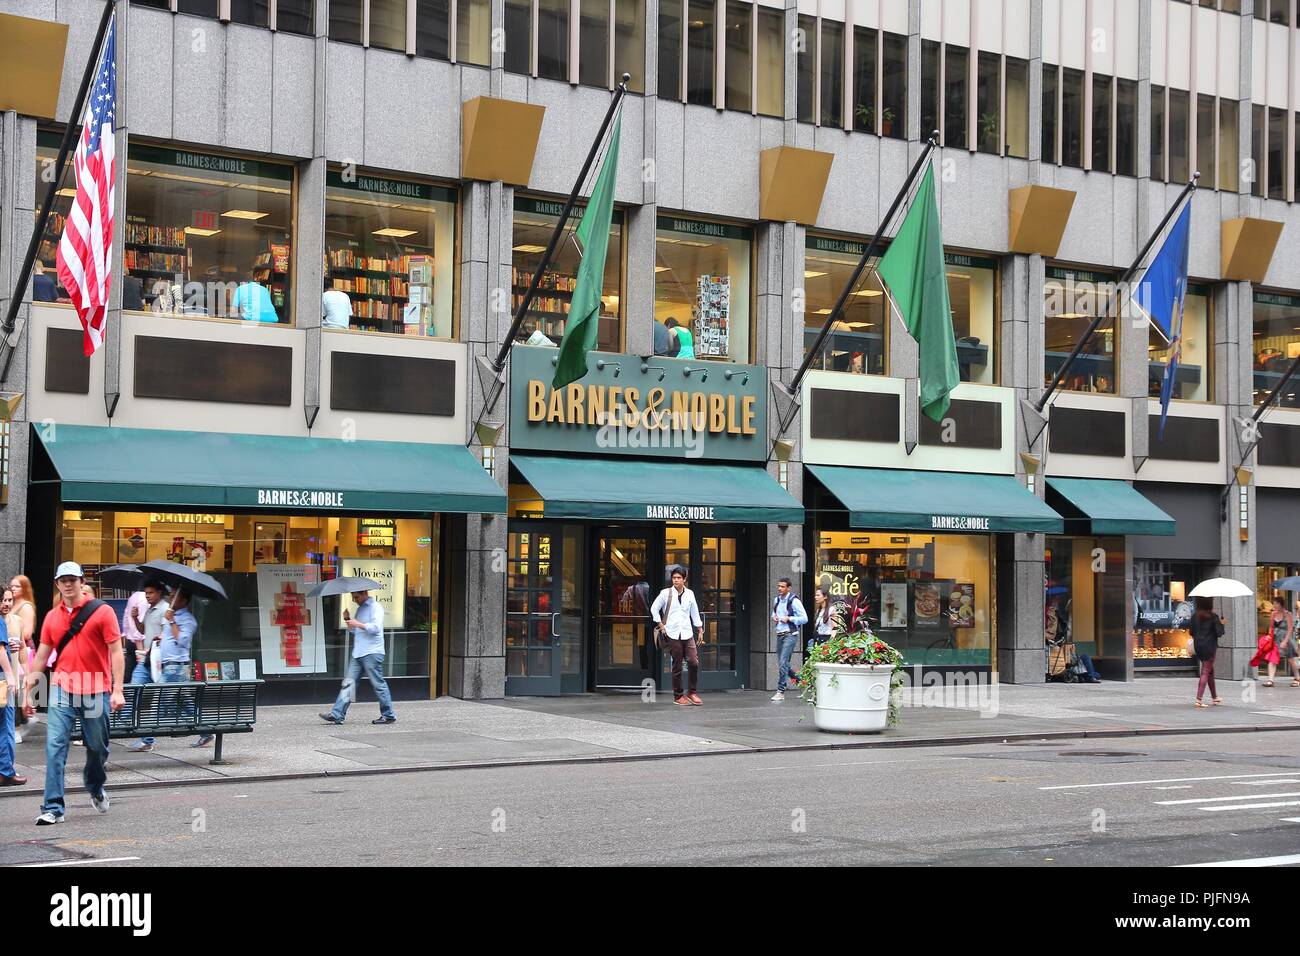 NEW YORK, USA - JULY 1, 2013: People walk past Barnes and Noble ...